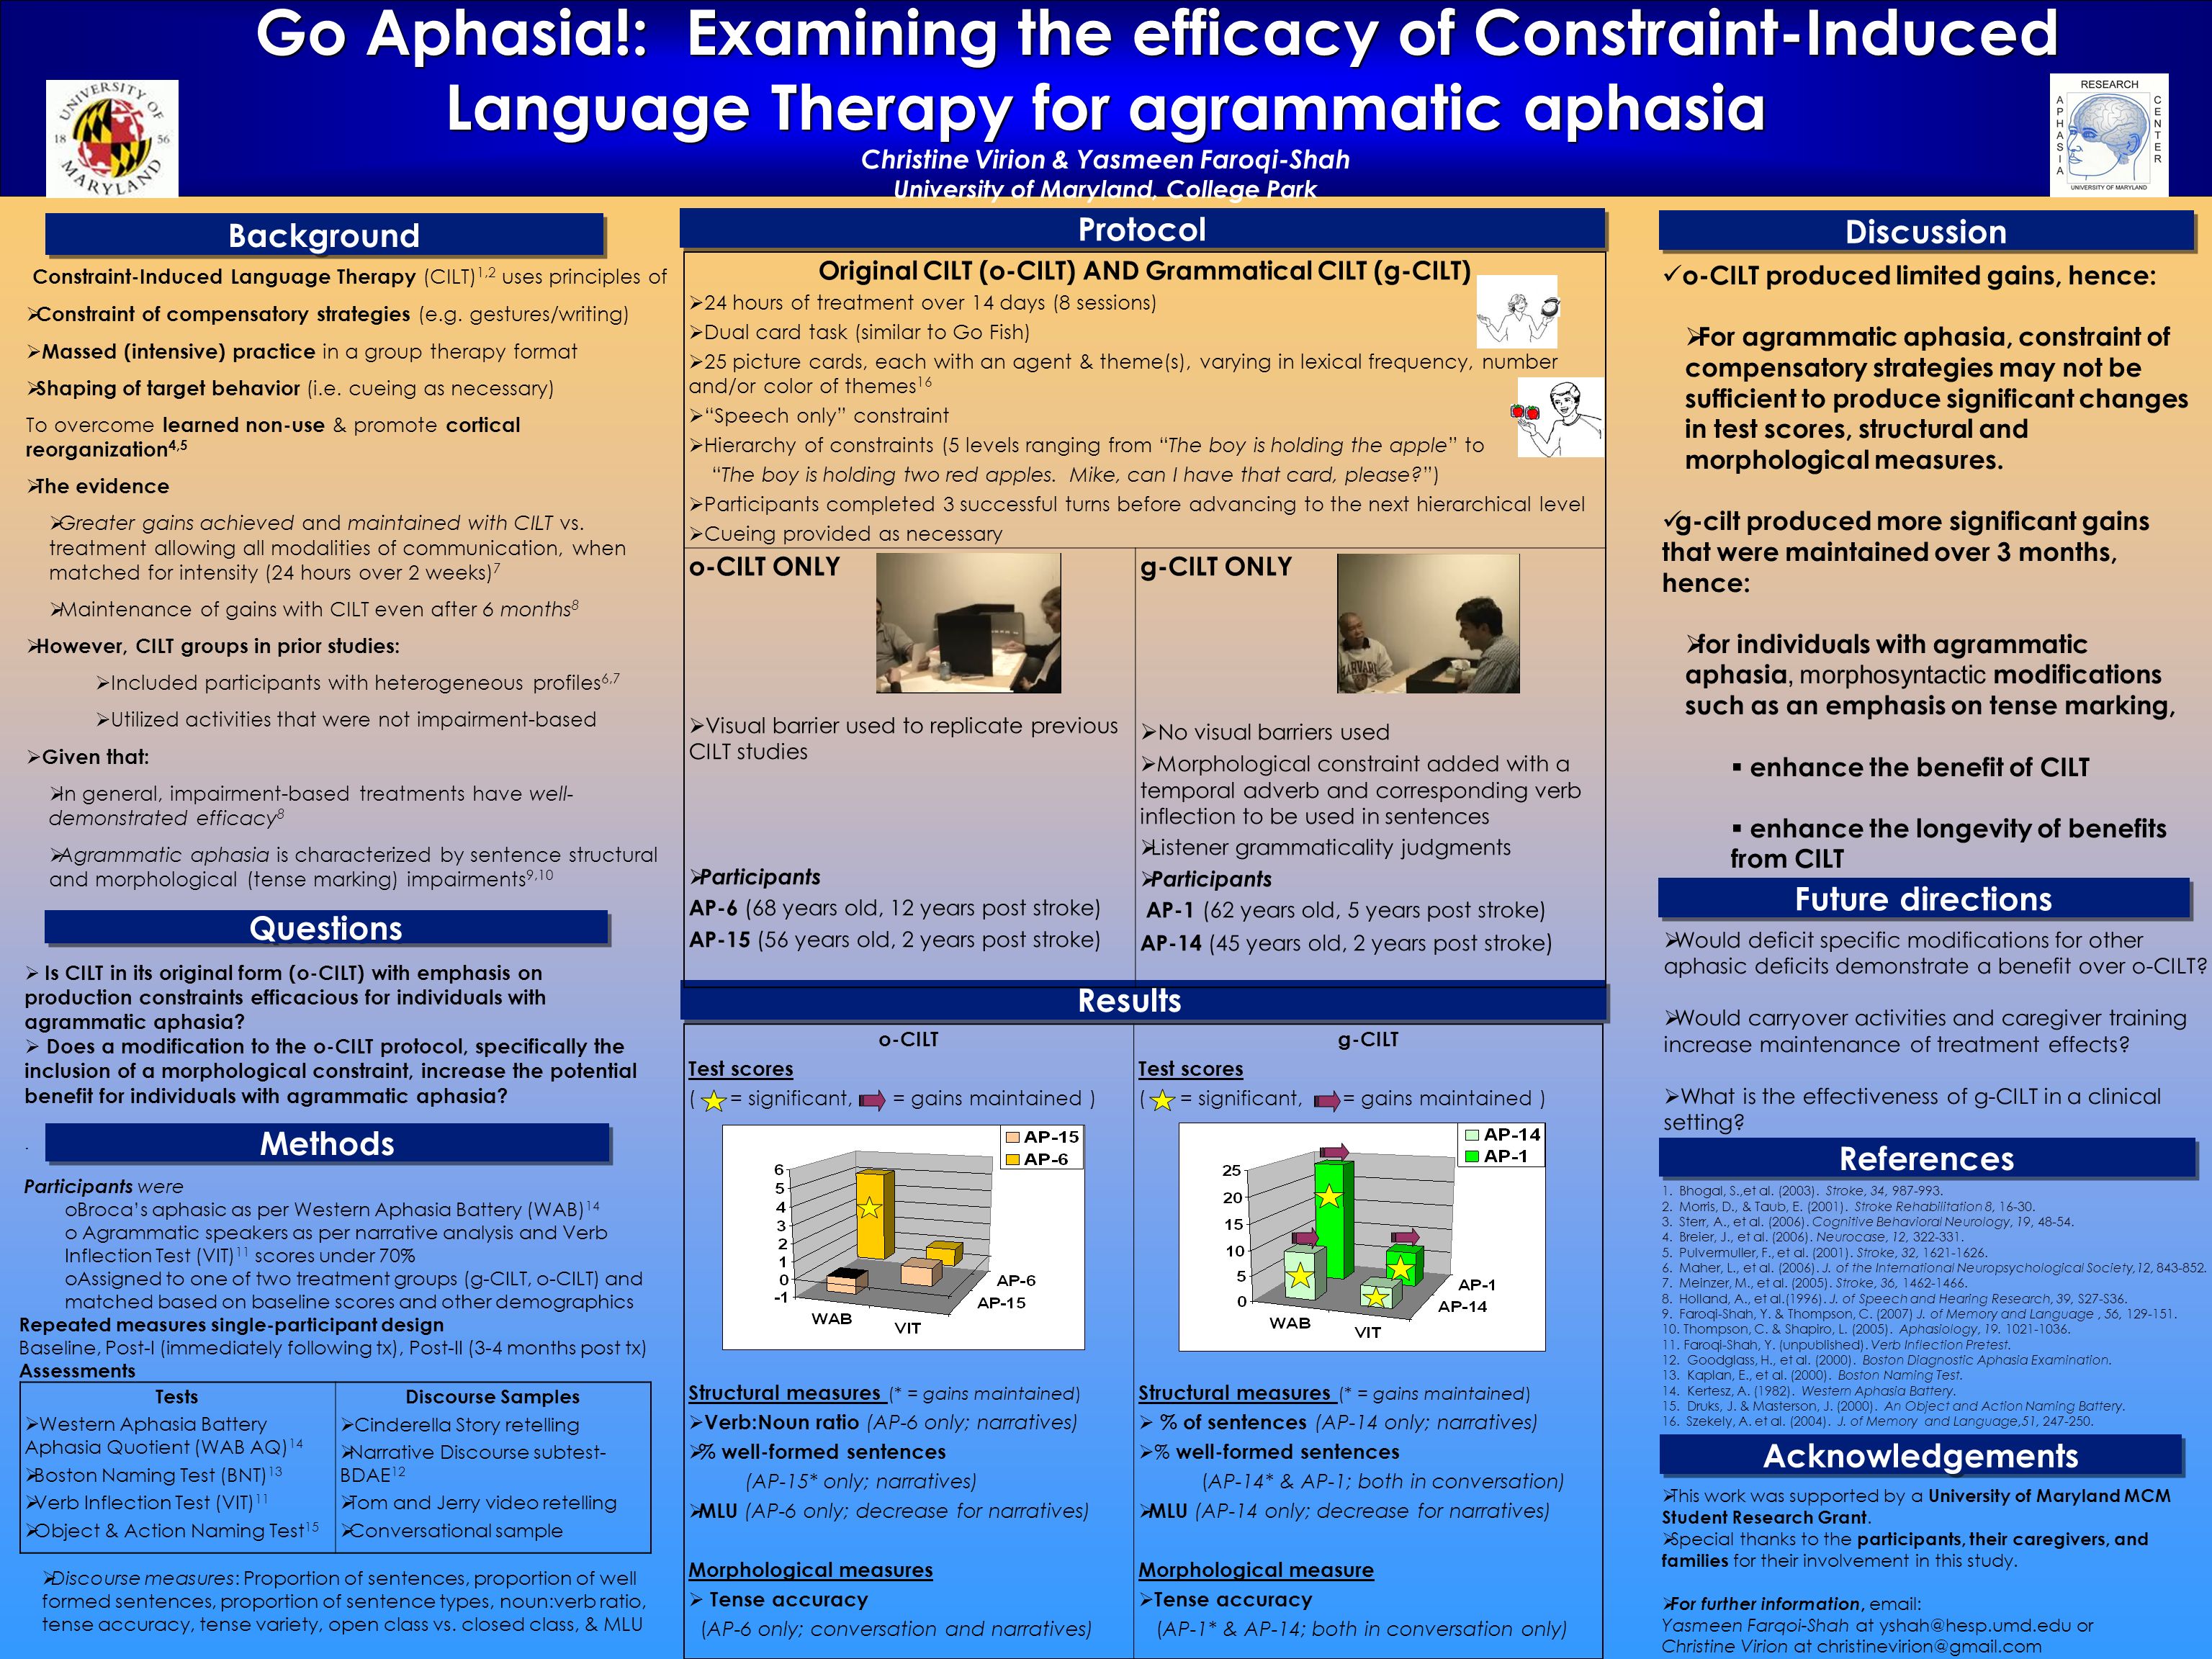 Participants were oBroca's aphasic as per Western Aphasia Battery (WAB) 14  o Agrammatic speakers as per narrative analysis and Verb Inflection Test  (VIT) - ppt download